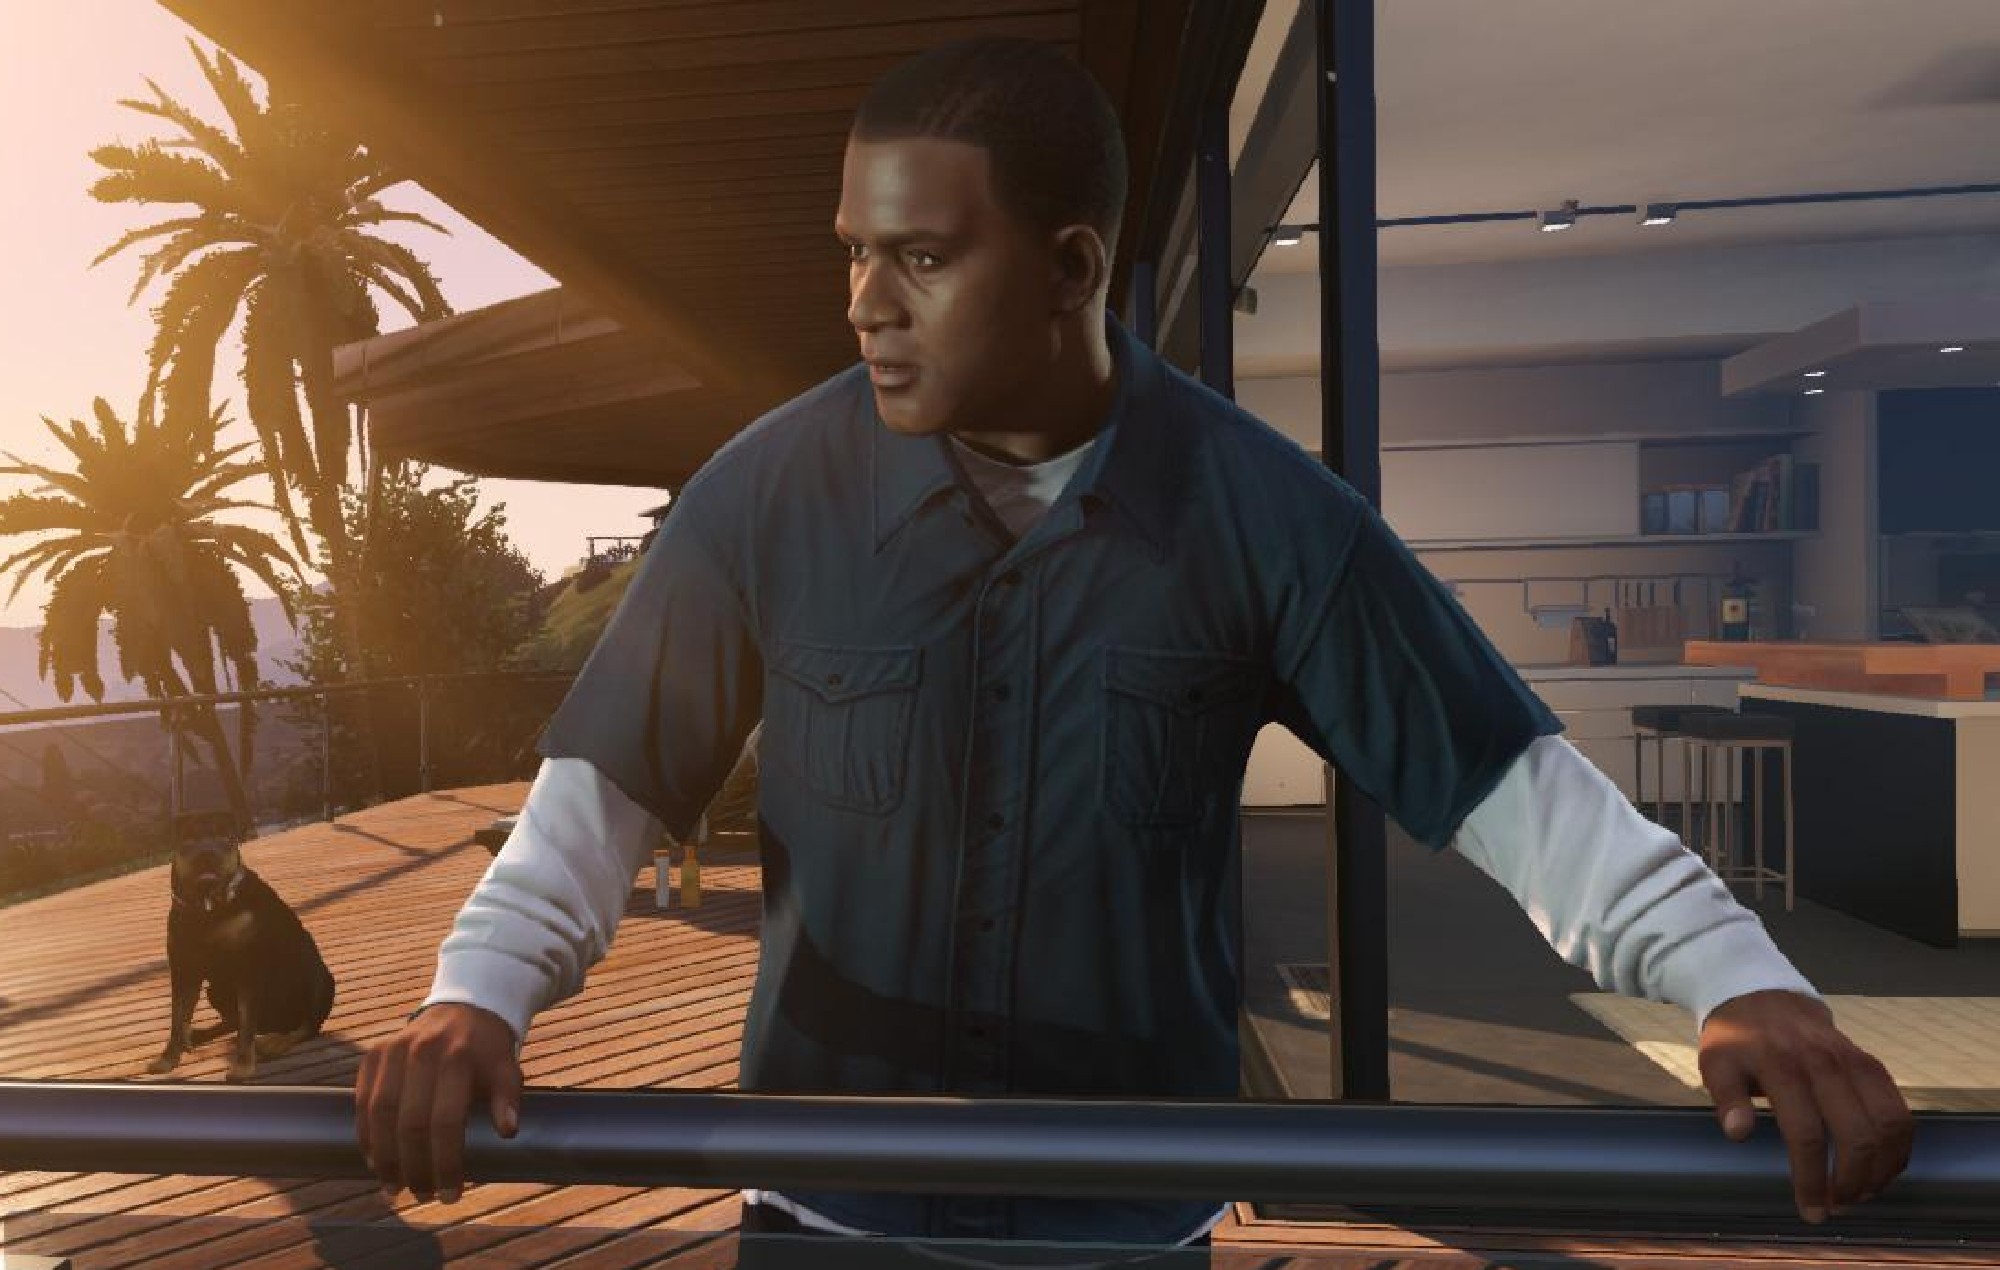 ‘Grand Theft Auto 6’ will reportedly be announced this week